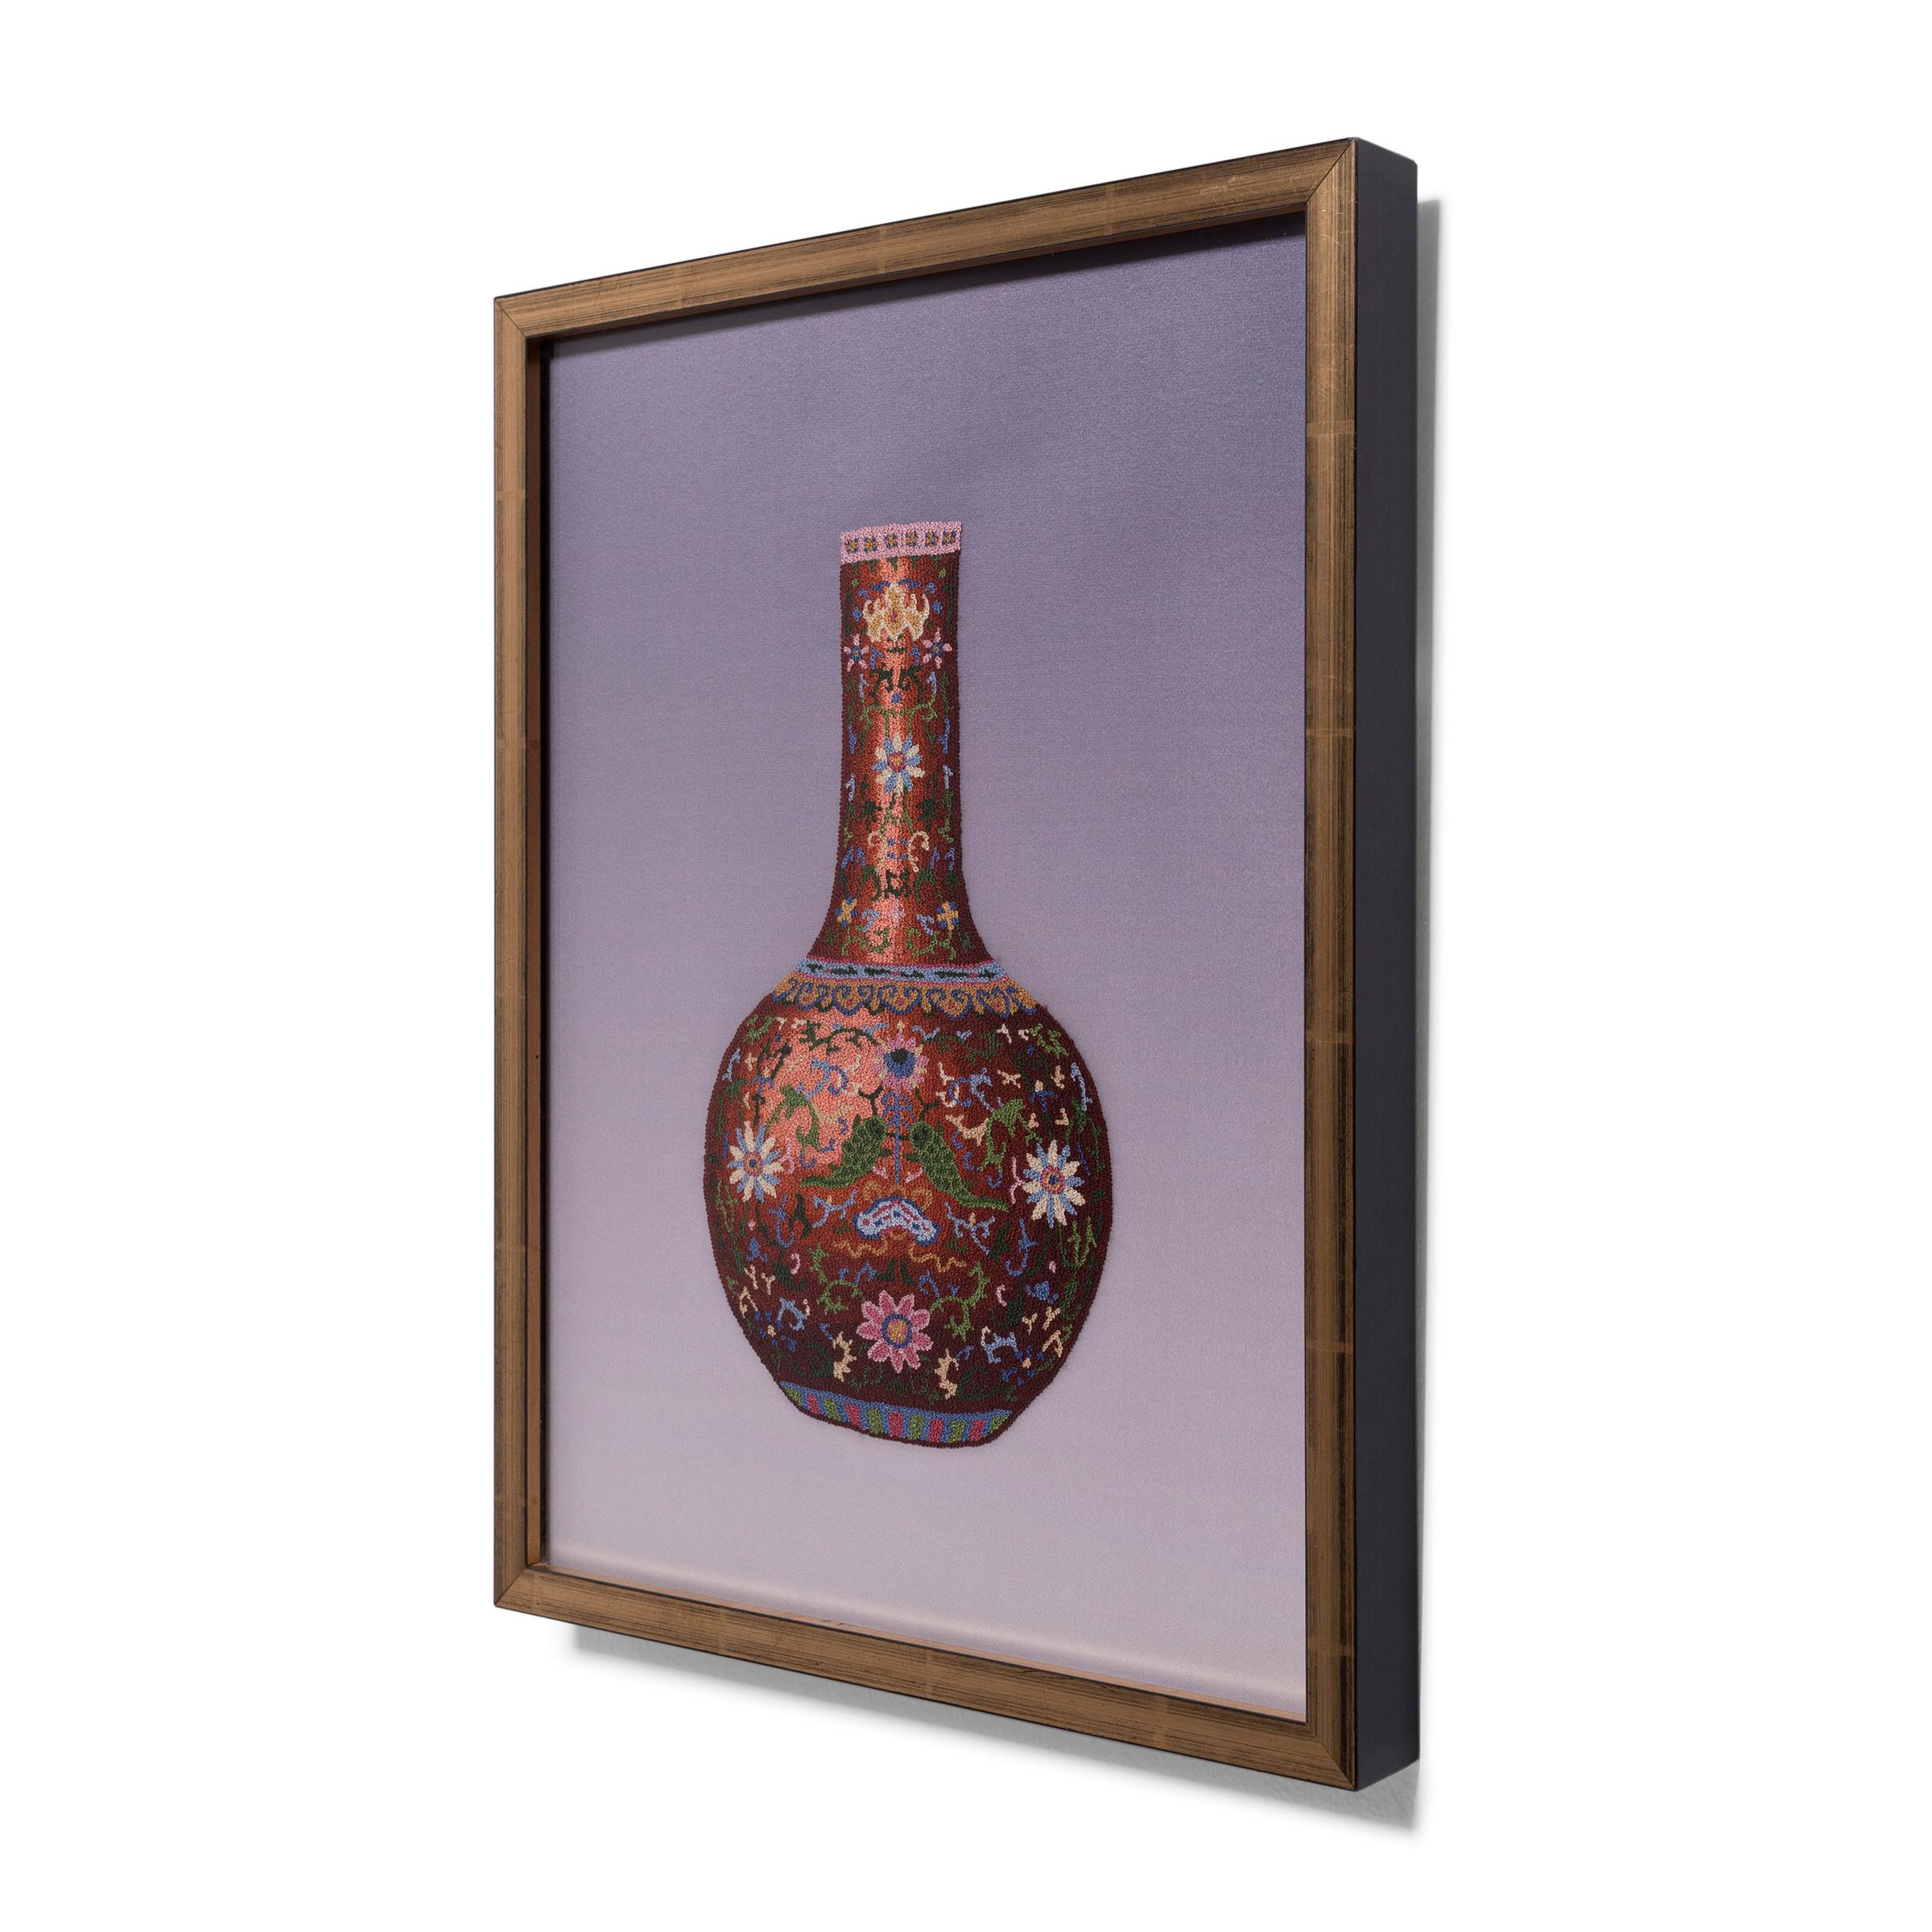 A wonderful example of Chinese embroidery, this framed silk textile uses the infamous forbidden stitch to depict a fine famille rose porcelain vase. Also known as the 